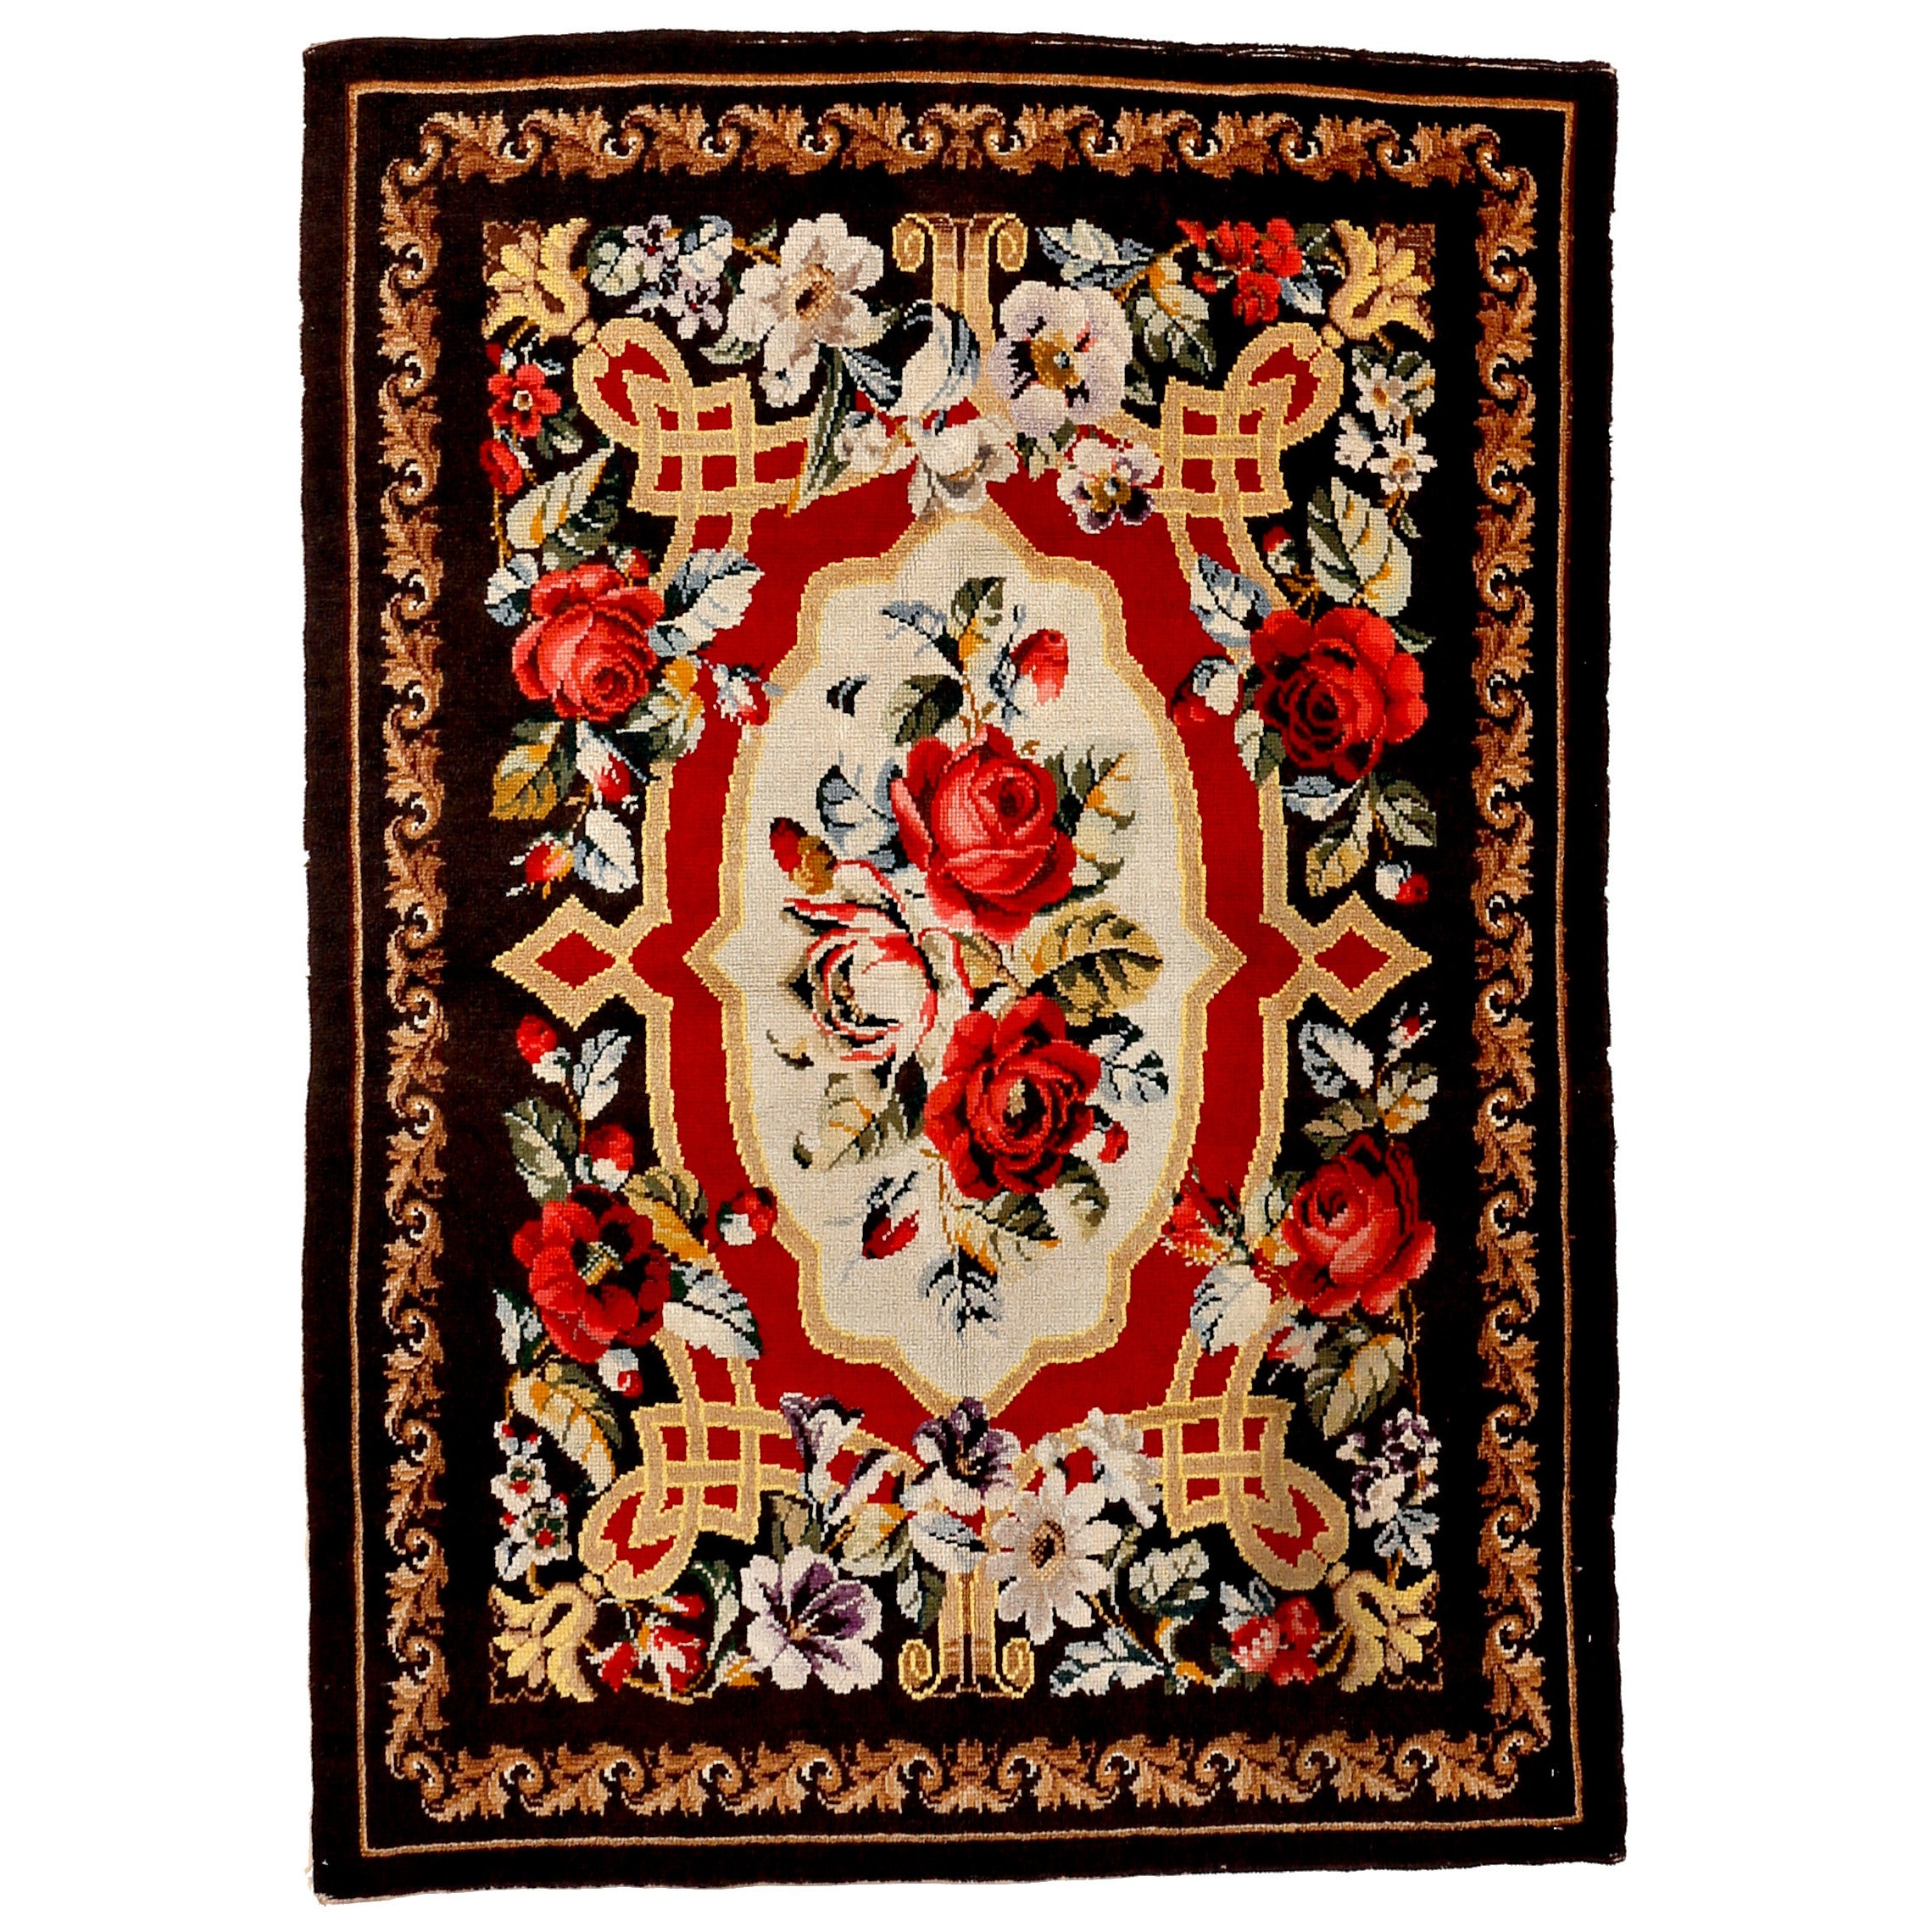 Rare Antique Ukrainian Pile Rug With Floral Garlands in the St. Petersburg Style